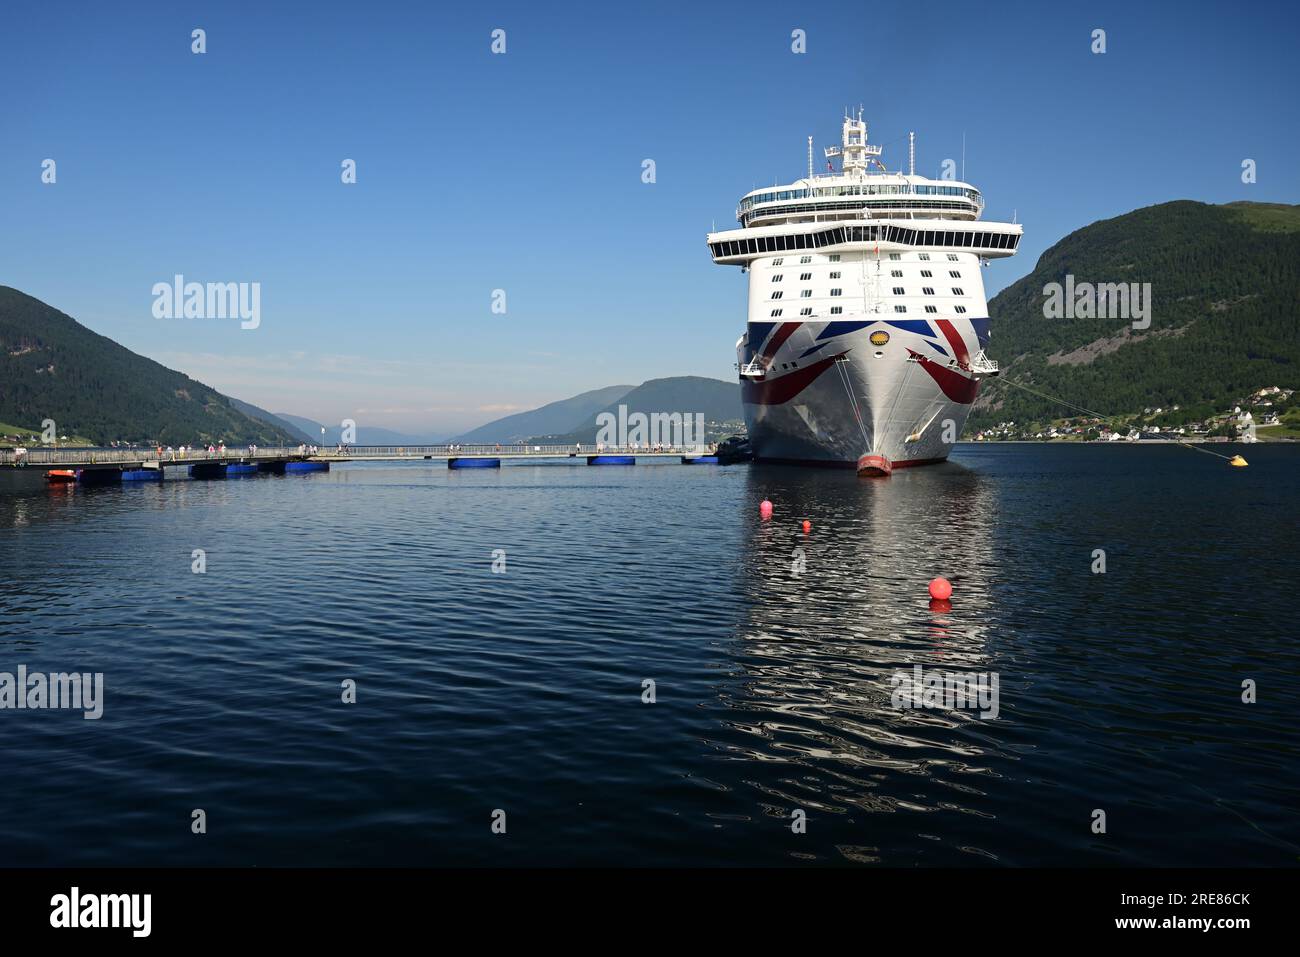 P&O cruise ship Britannia moored at Nordfjordeid in Norway, showing part of the 'SeaWalk' floating pier that allows passengers to go ashore. Stock Photo